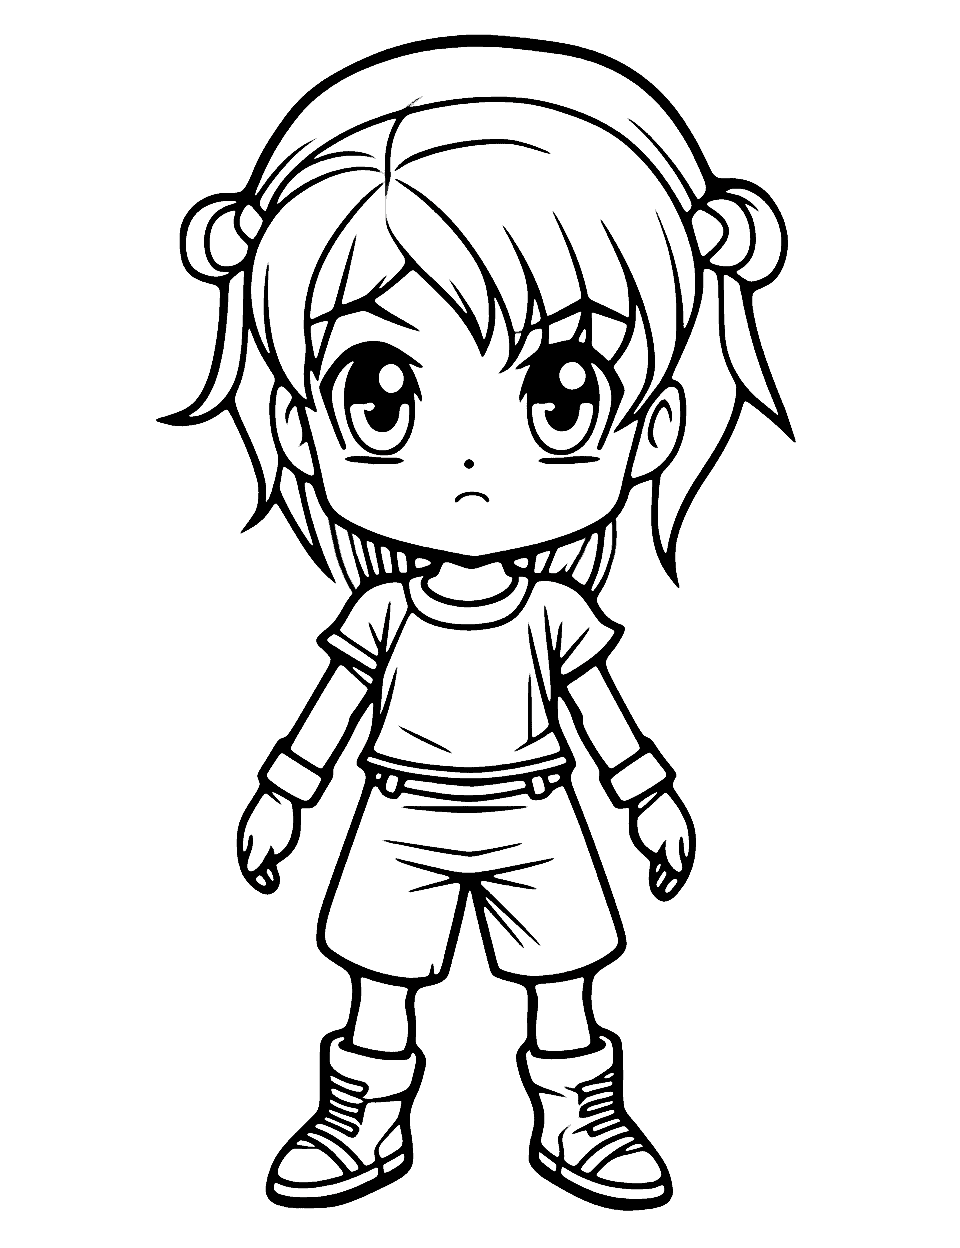 Top 10 Free Printable Anime Coloring Pages for Kids | GBcoloring -  GBcoloring - Best coloring pages for kids